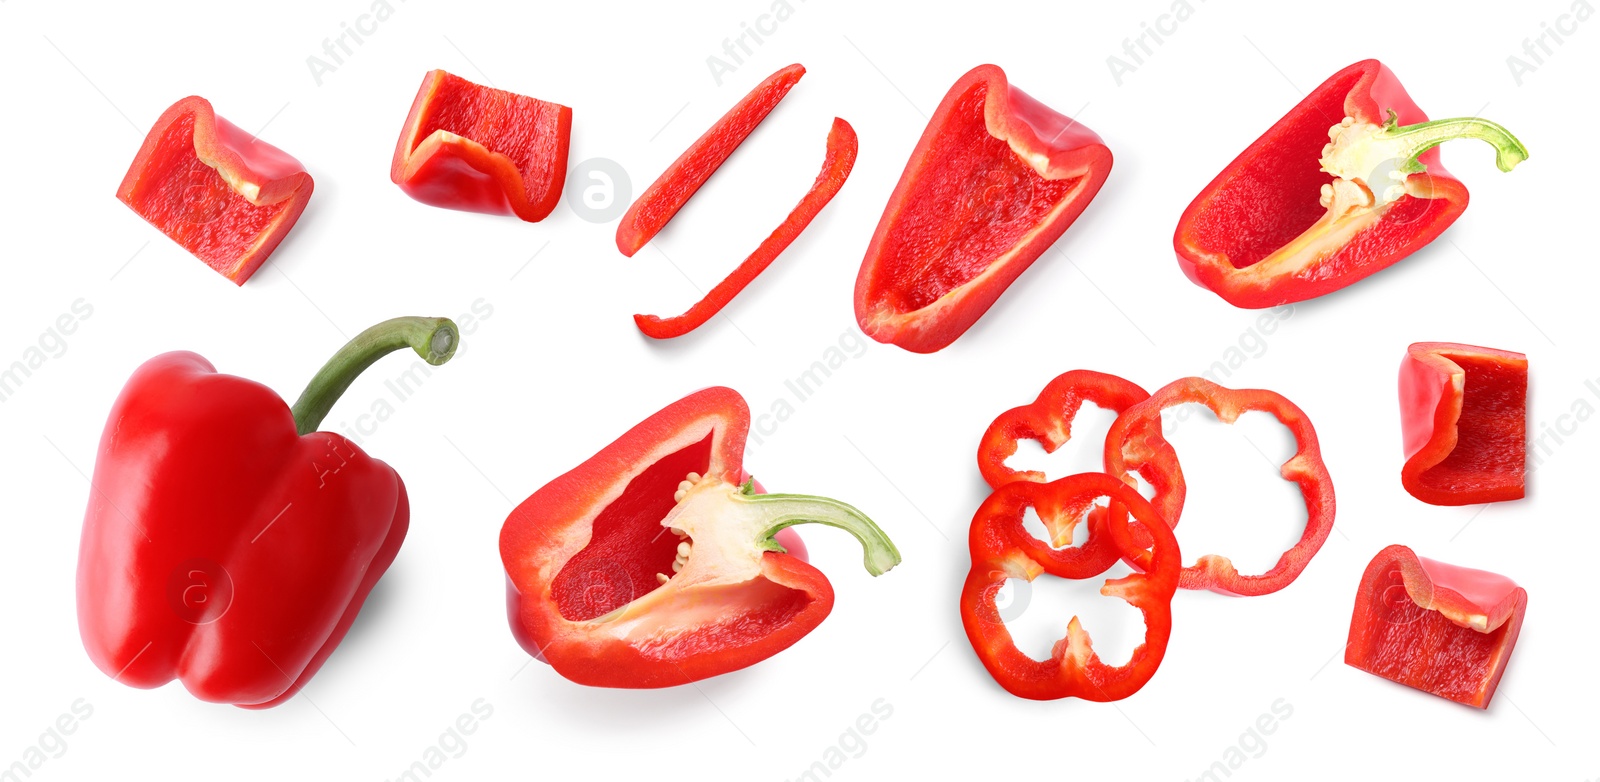 Image of Set of ripe red bell peppers on white background